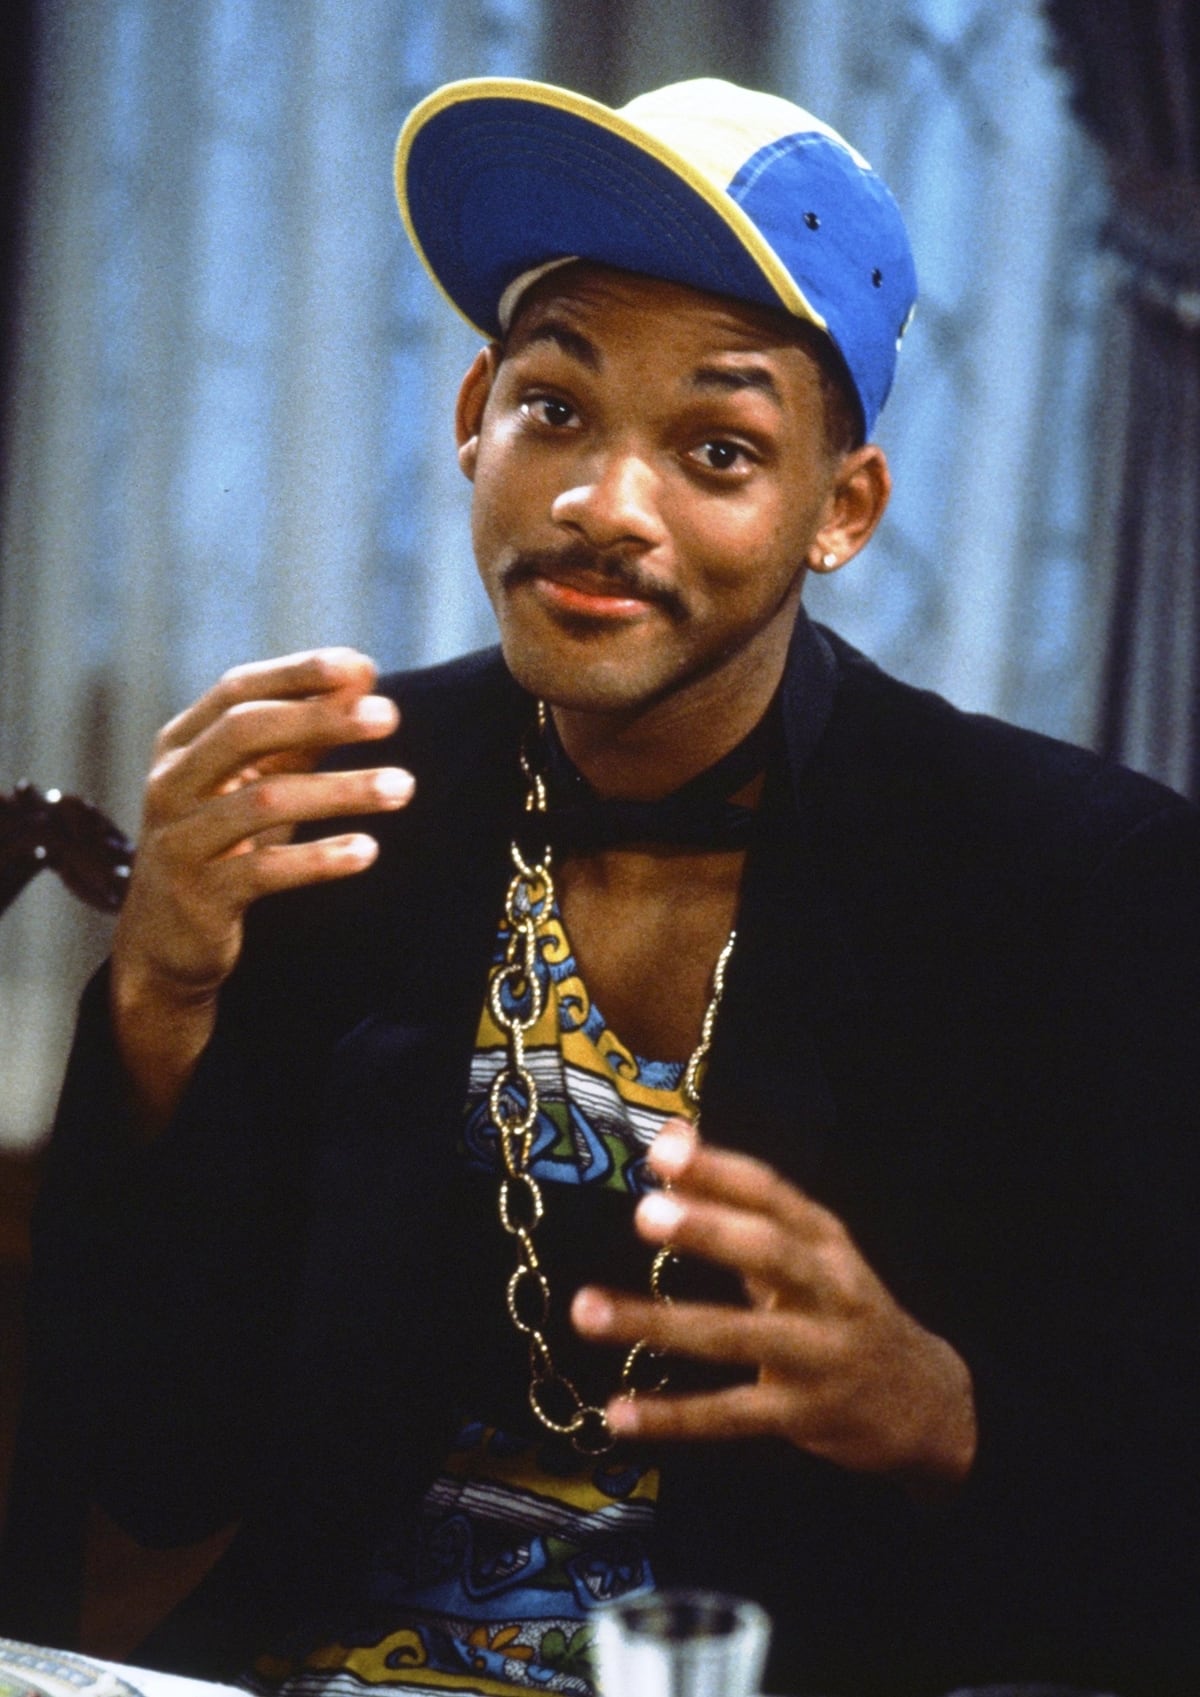 Will Smith was 21 years old when he made his debut on the sitcom The Fresh Prince of Bel-Air